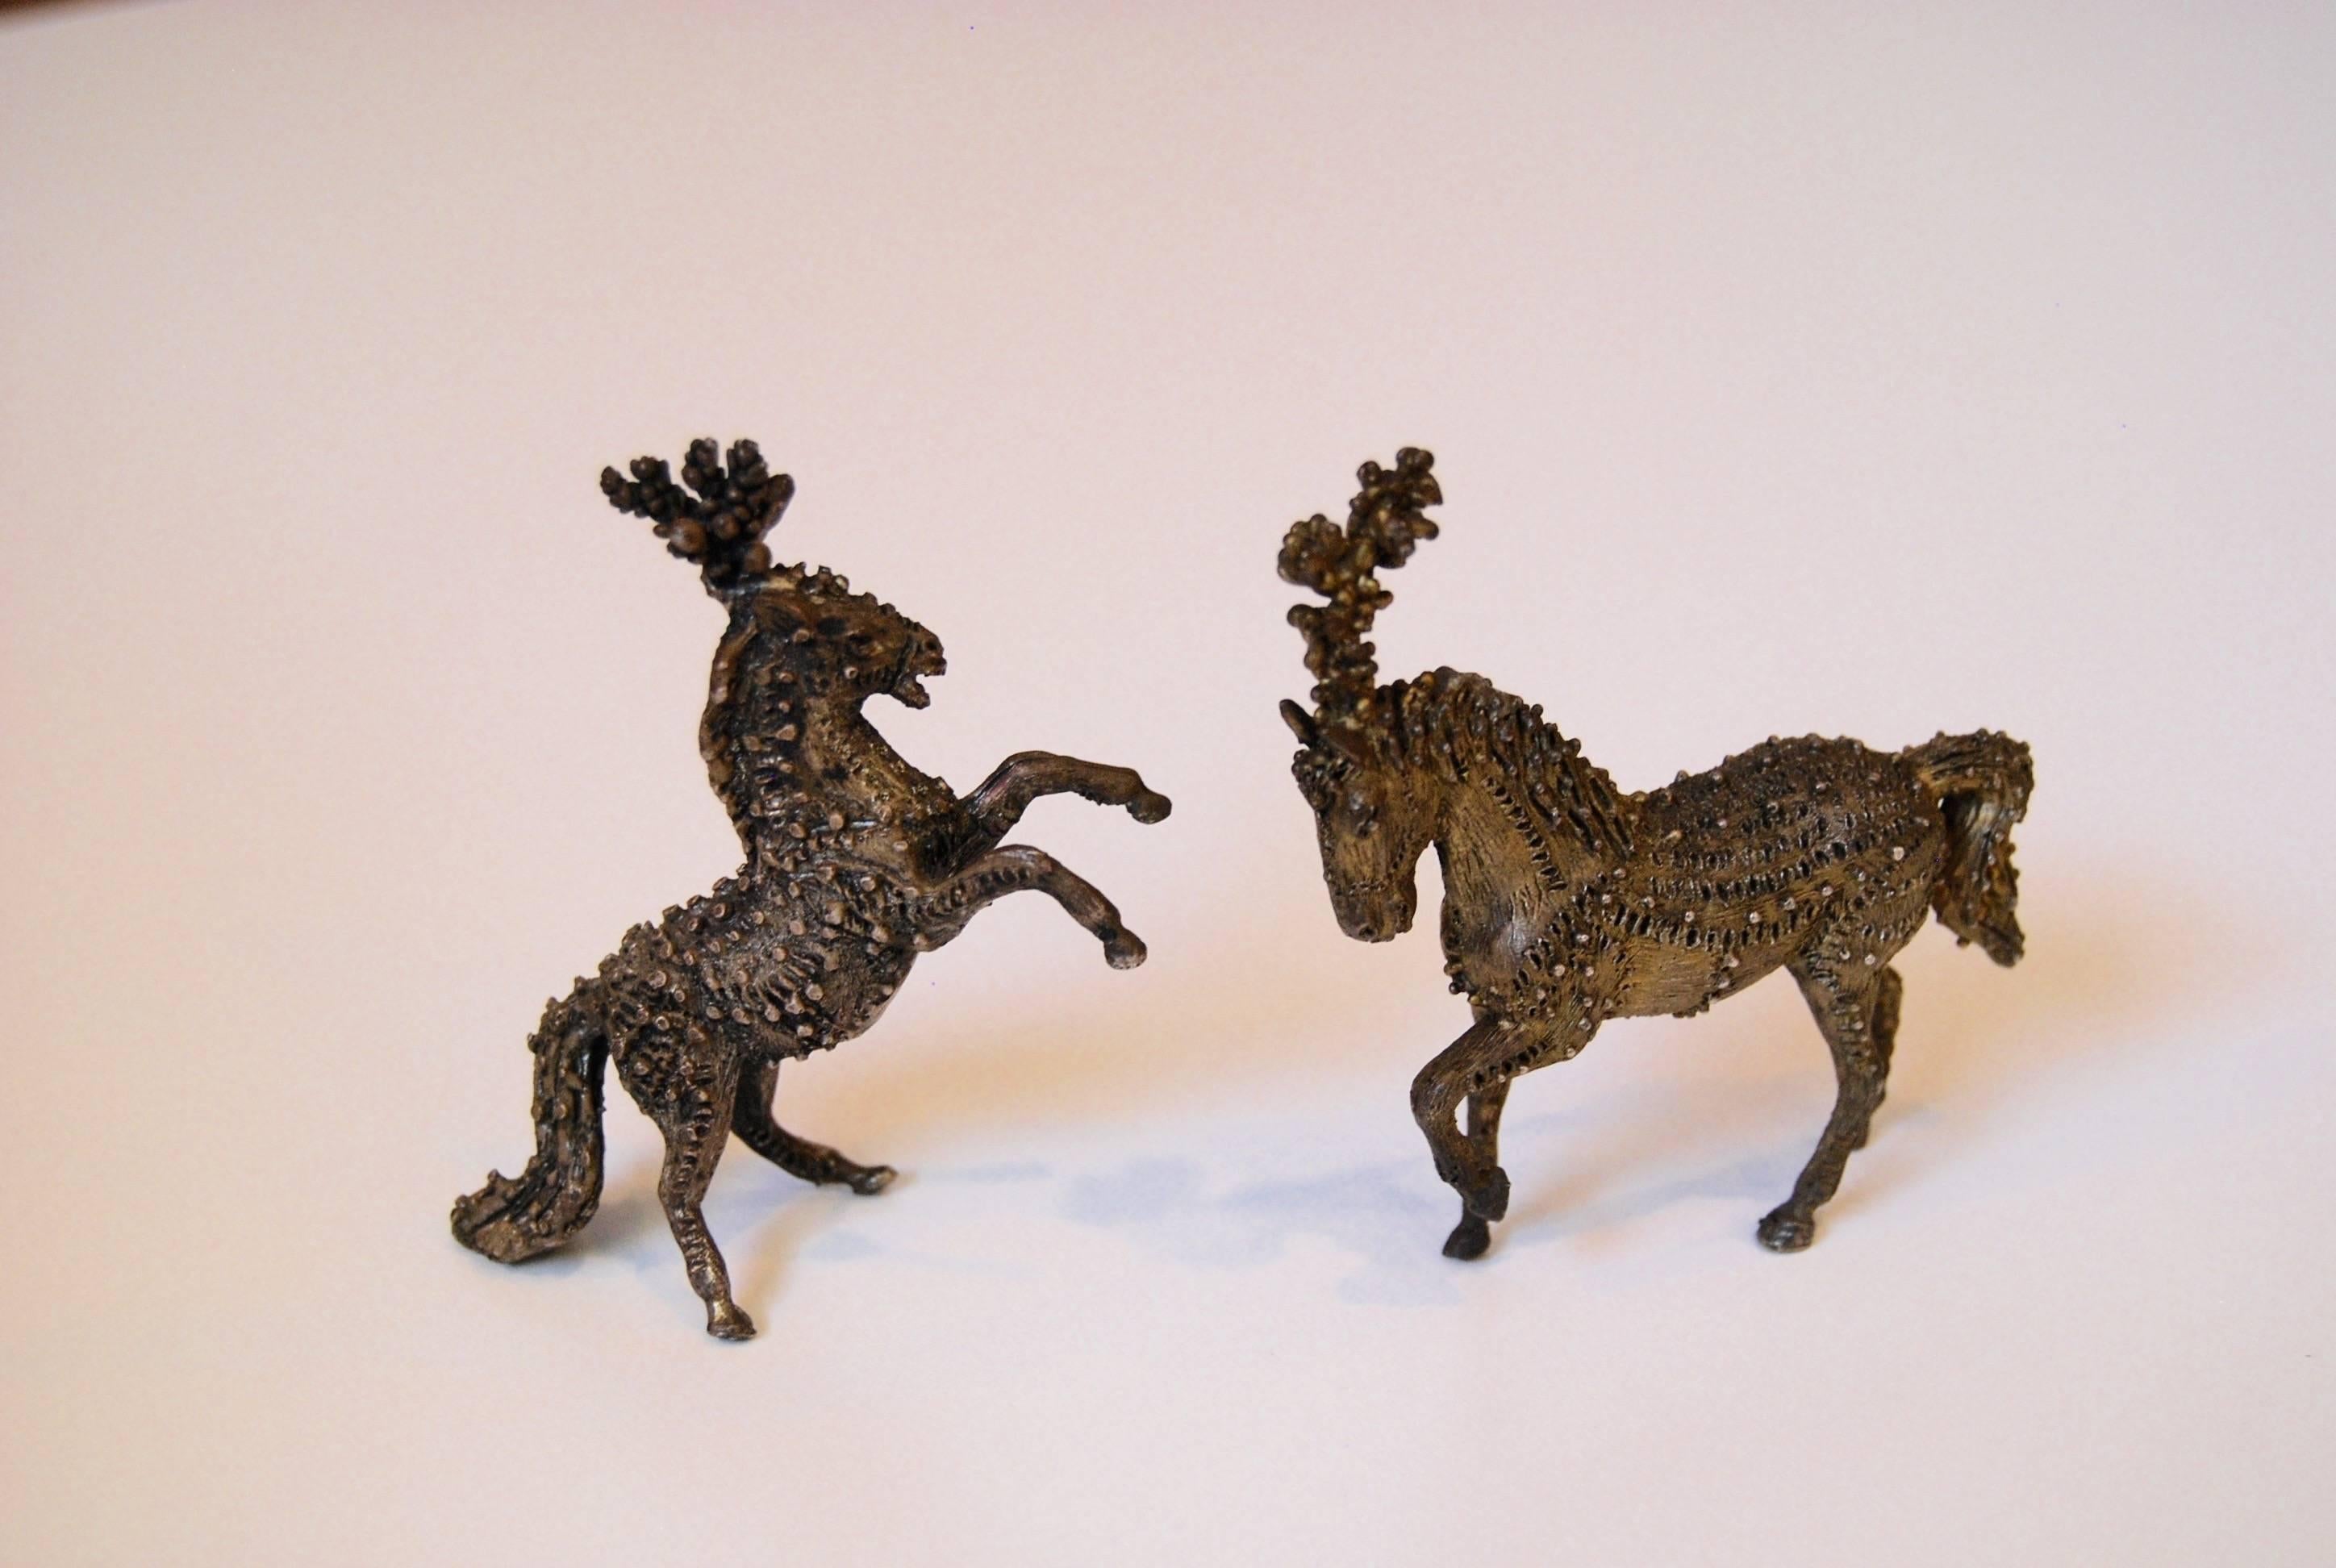 A Pair of miniature highly detailed circus horses from Sascha Brastoff's personal collection. These may have been prototypes for horse statues he created for The Franklin MInt.